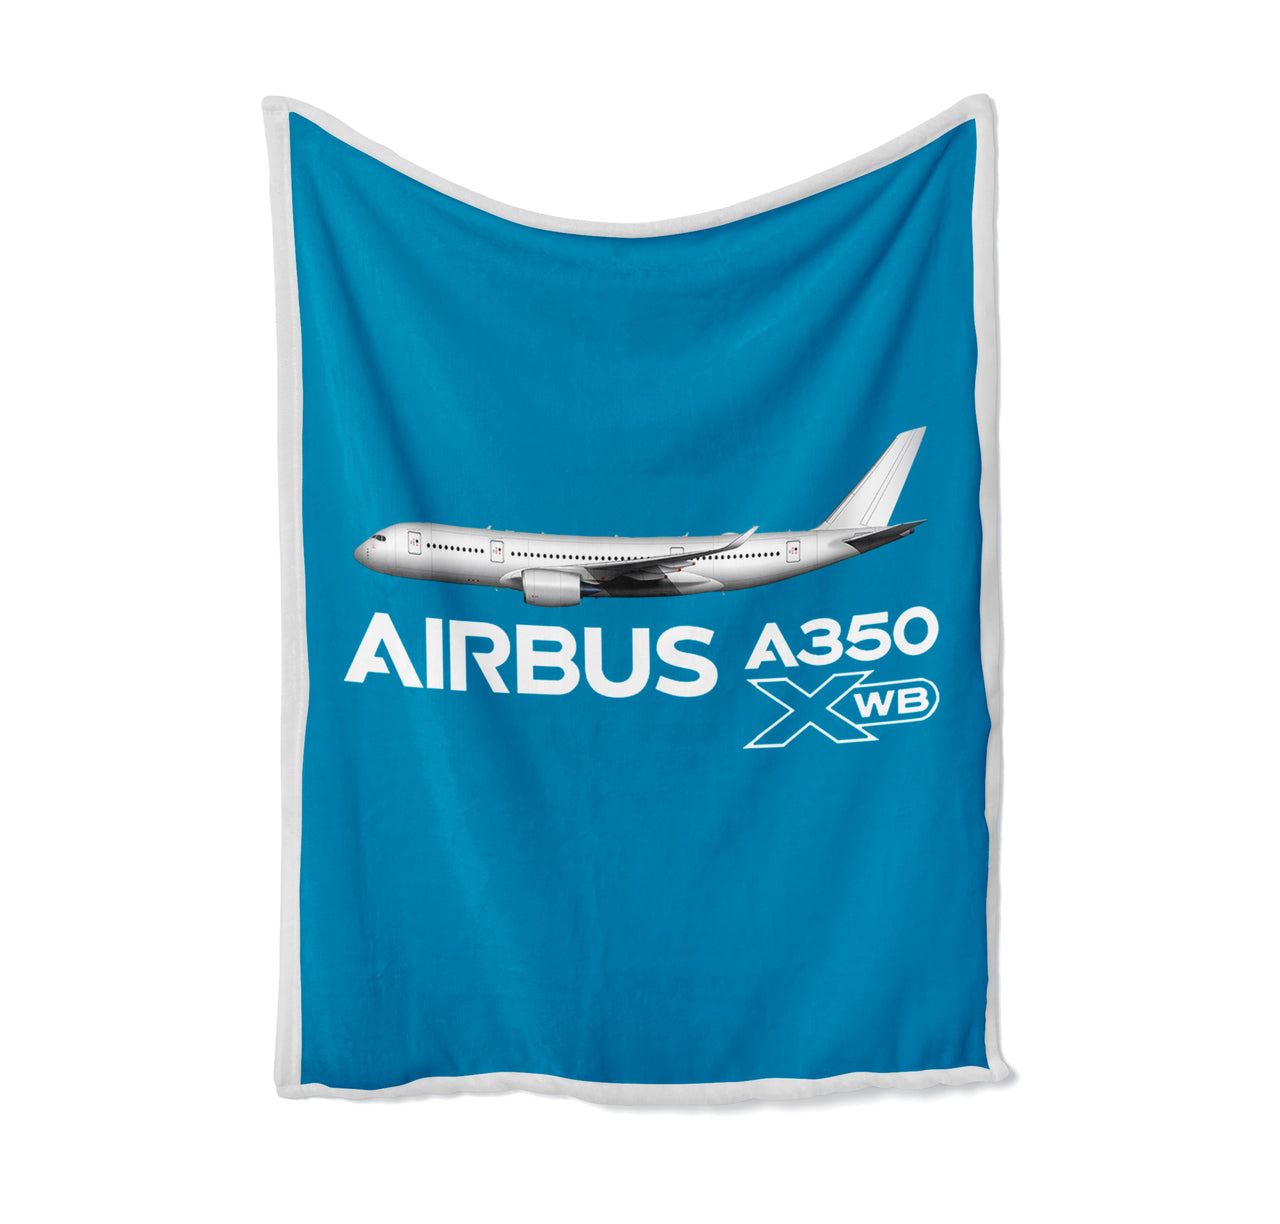 The Airbus A350 WXB Designed Bed Blankets & Covers